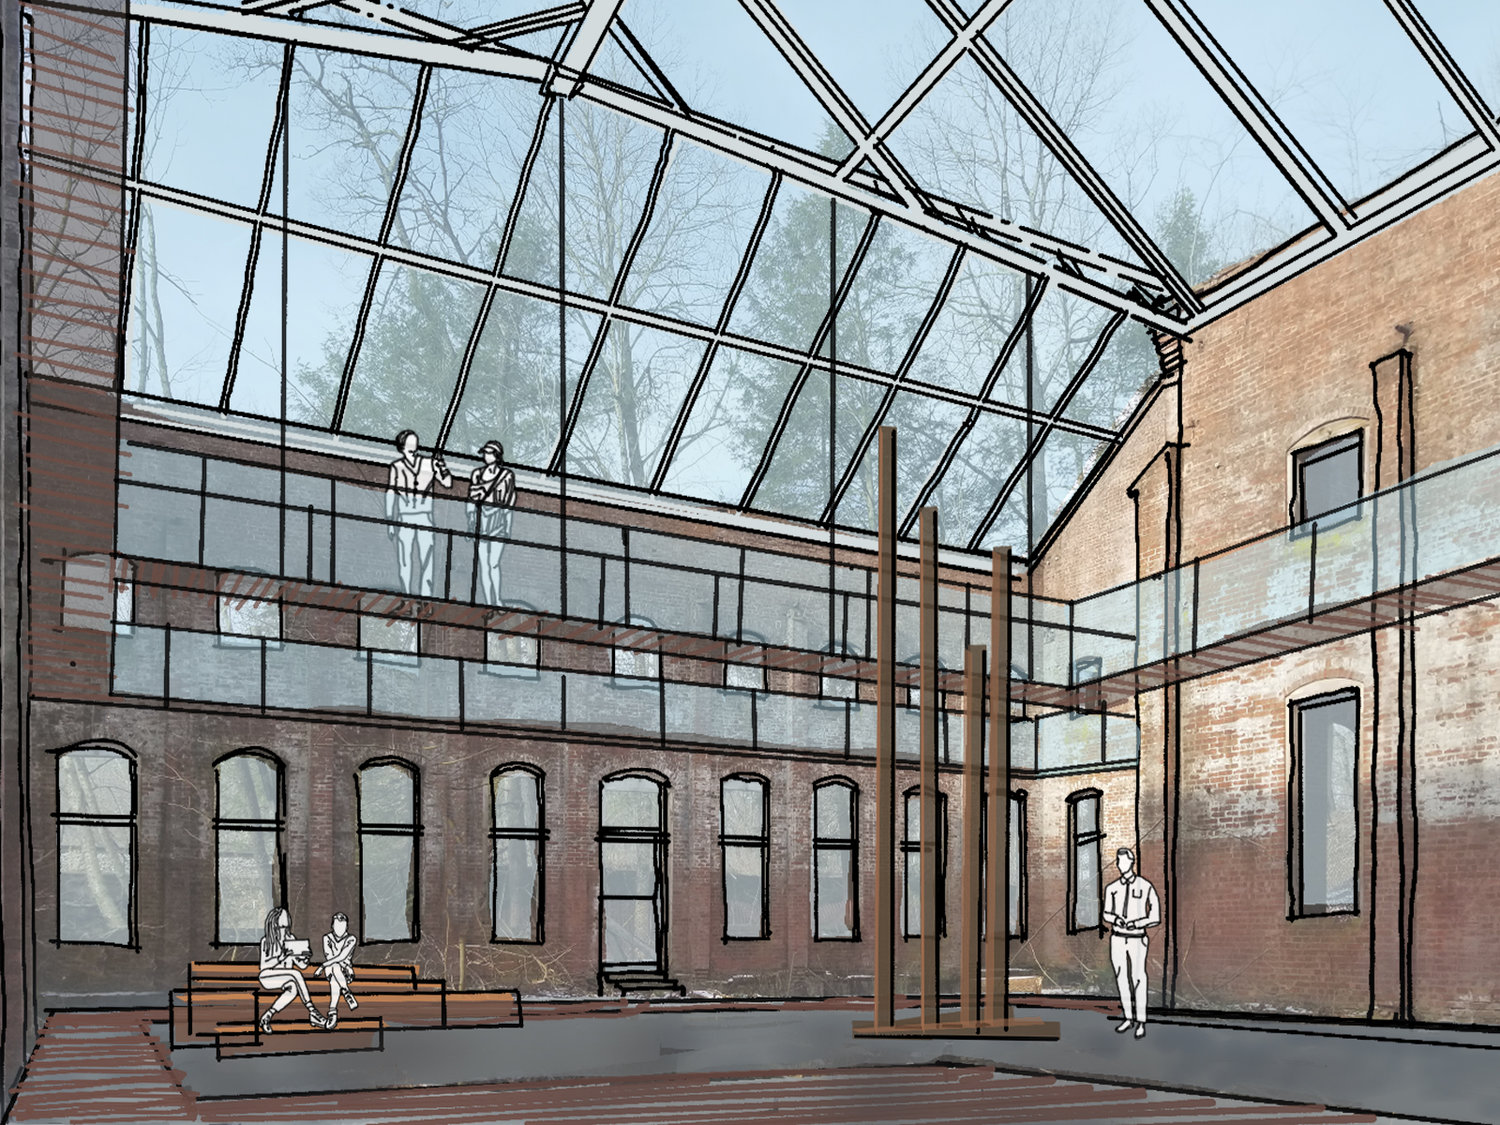 The vision for what the pumphouse could become. A glass roof, steel catwalks, a sculpture garden and a pop-up food court have all been proposed and incorporated into this rendering from the architect.